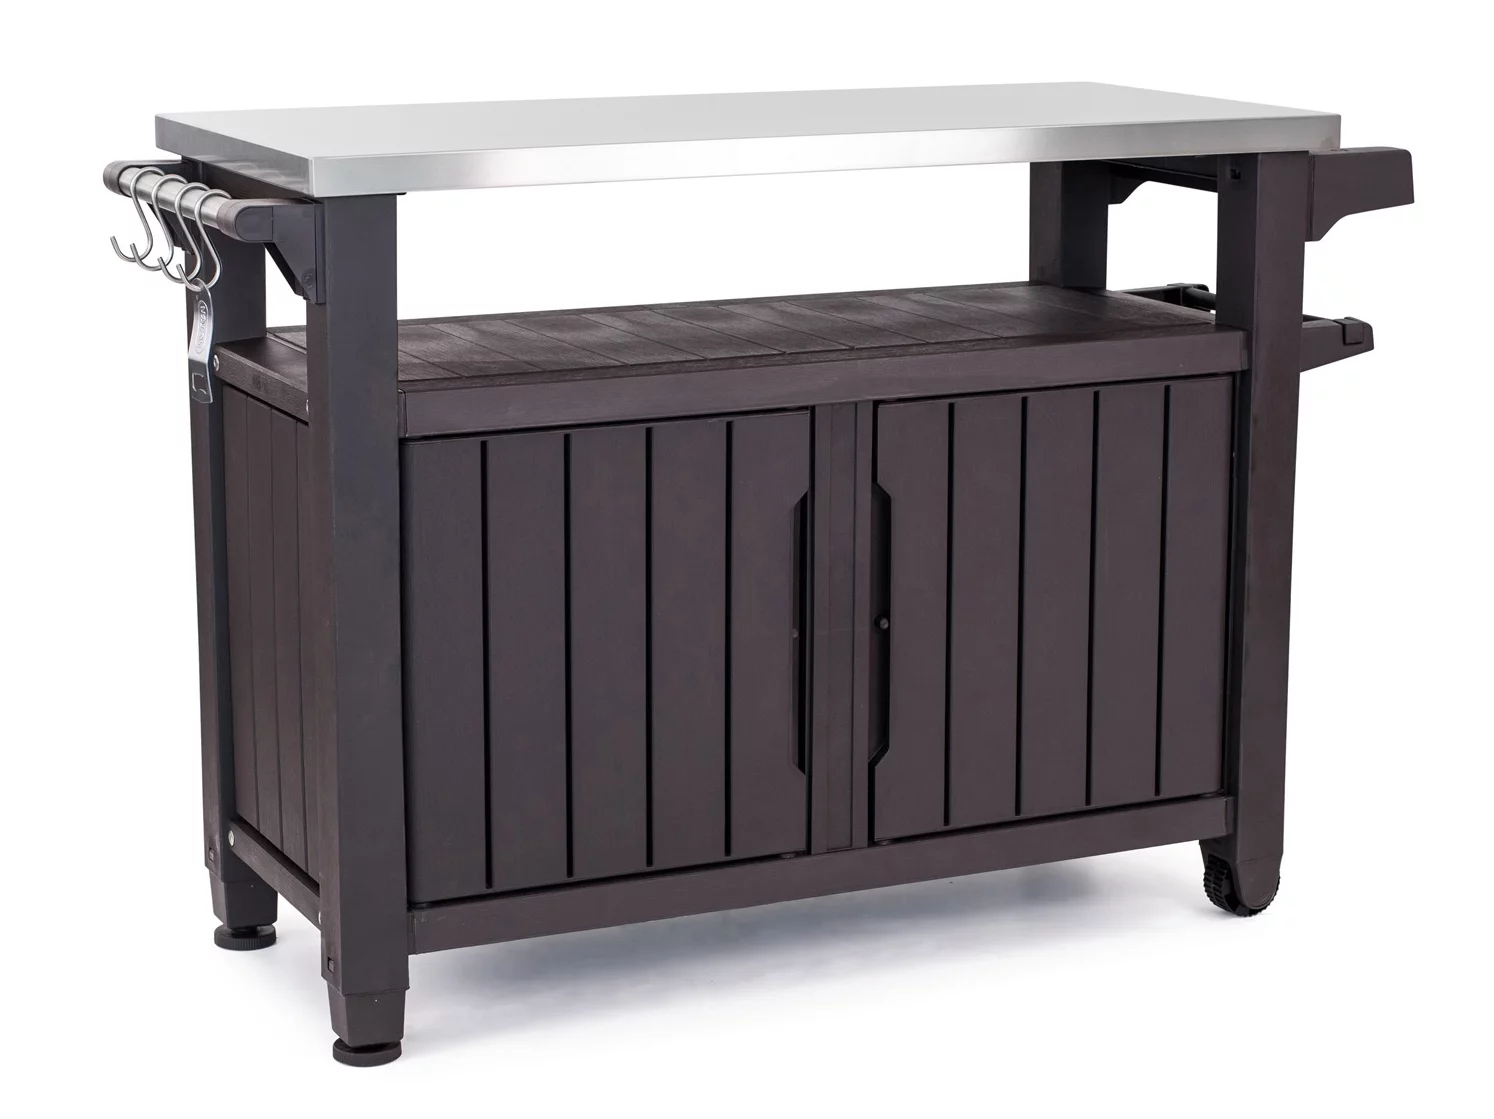 Keter Unity XL Outdoor Kitchen Bar Rolling Cart with Storage Cabinet, Brown